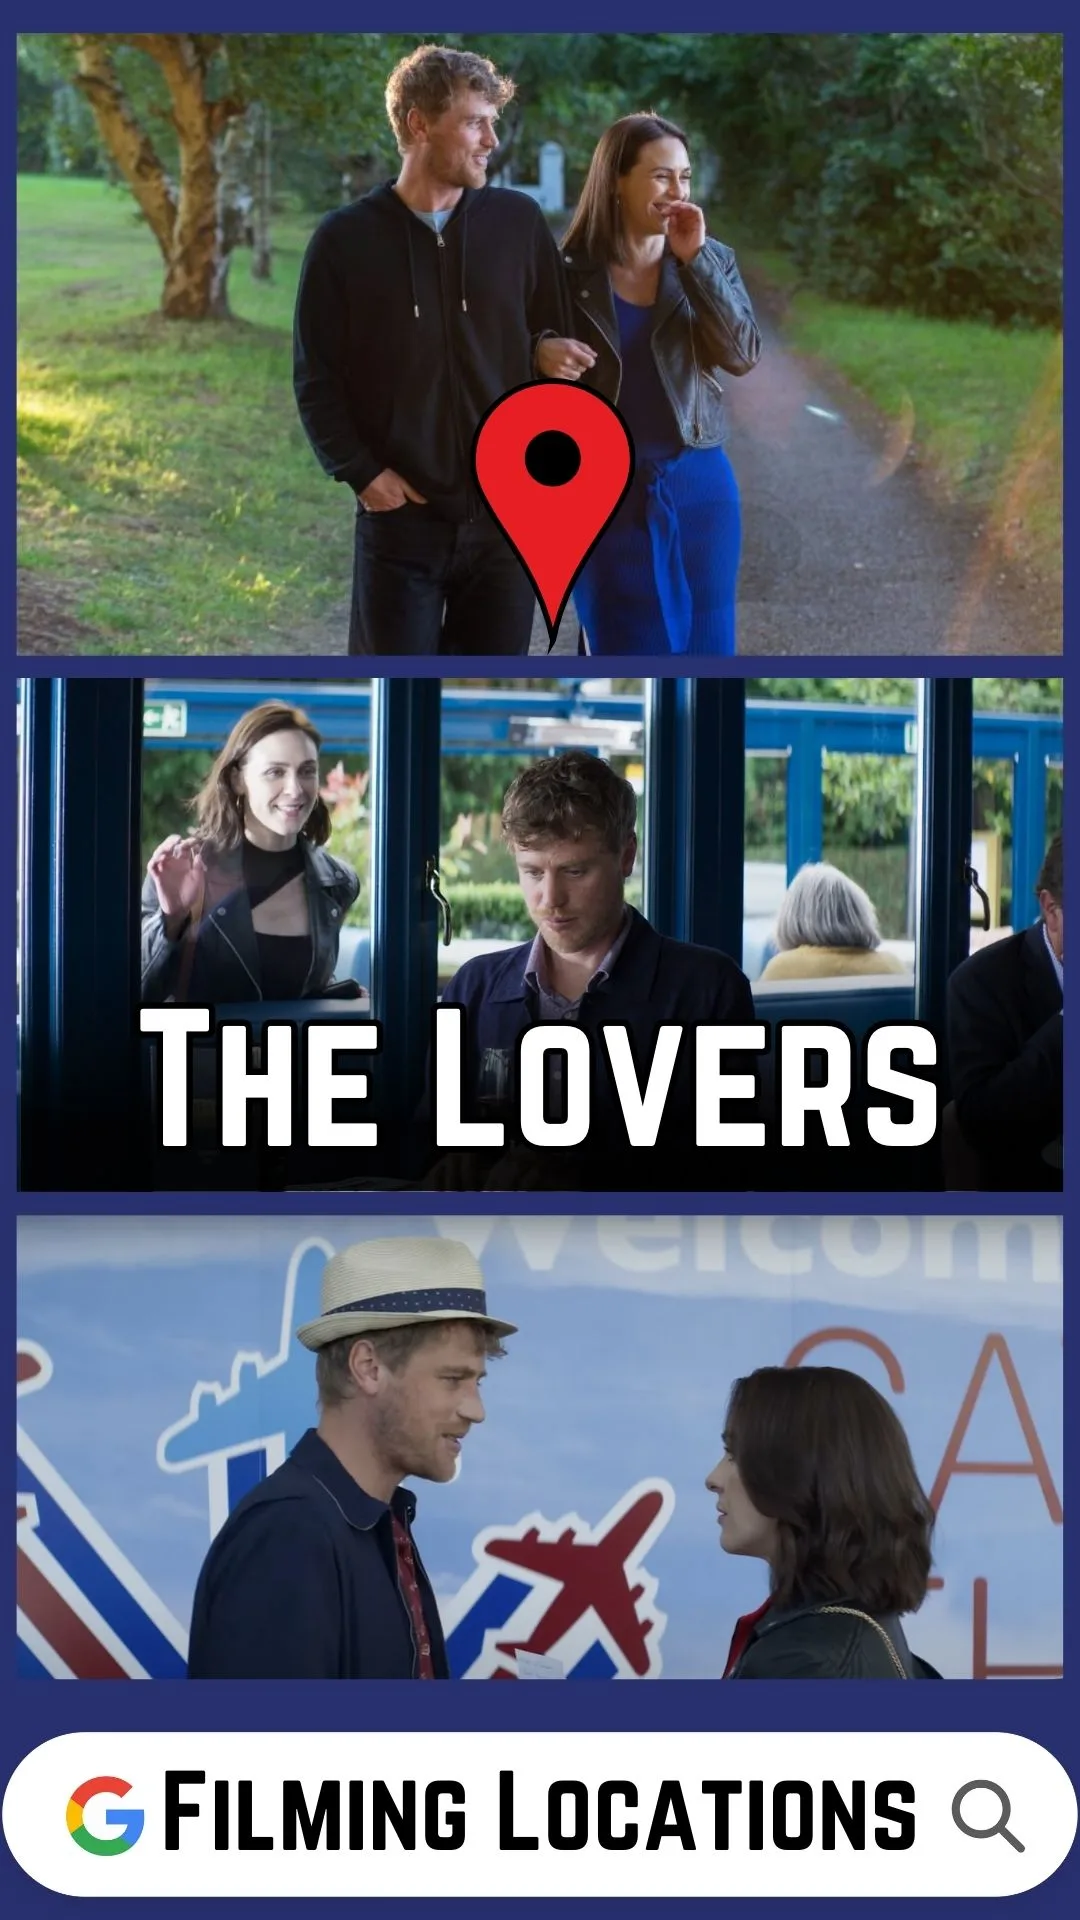 The Lovers Filming Locations